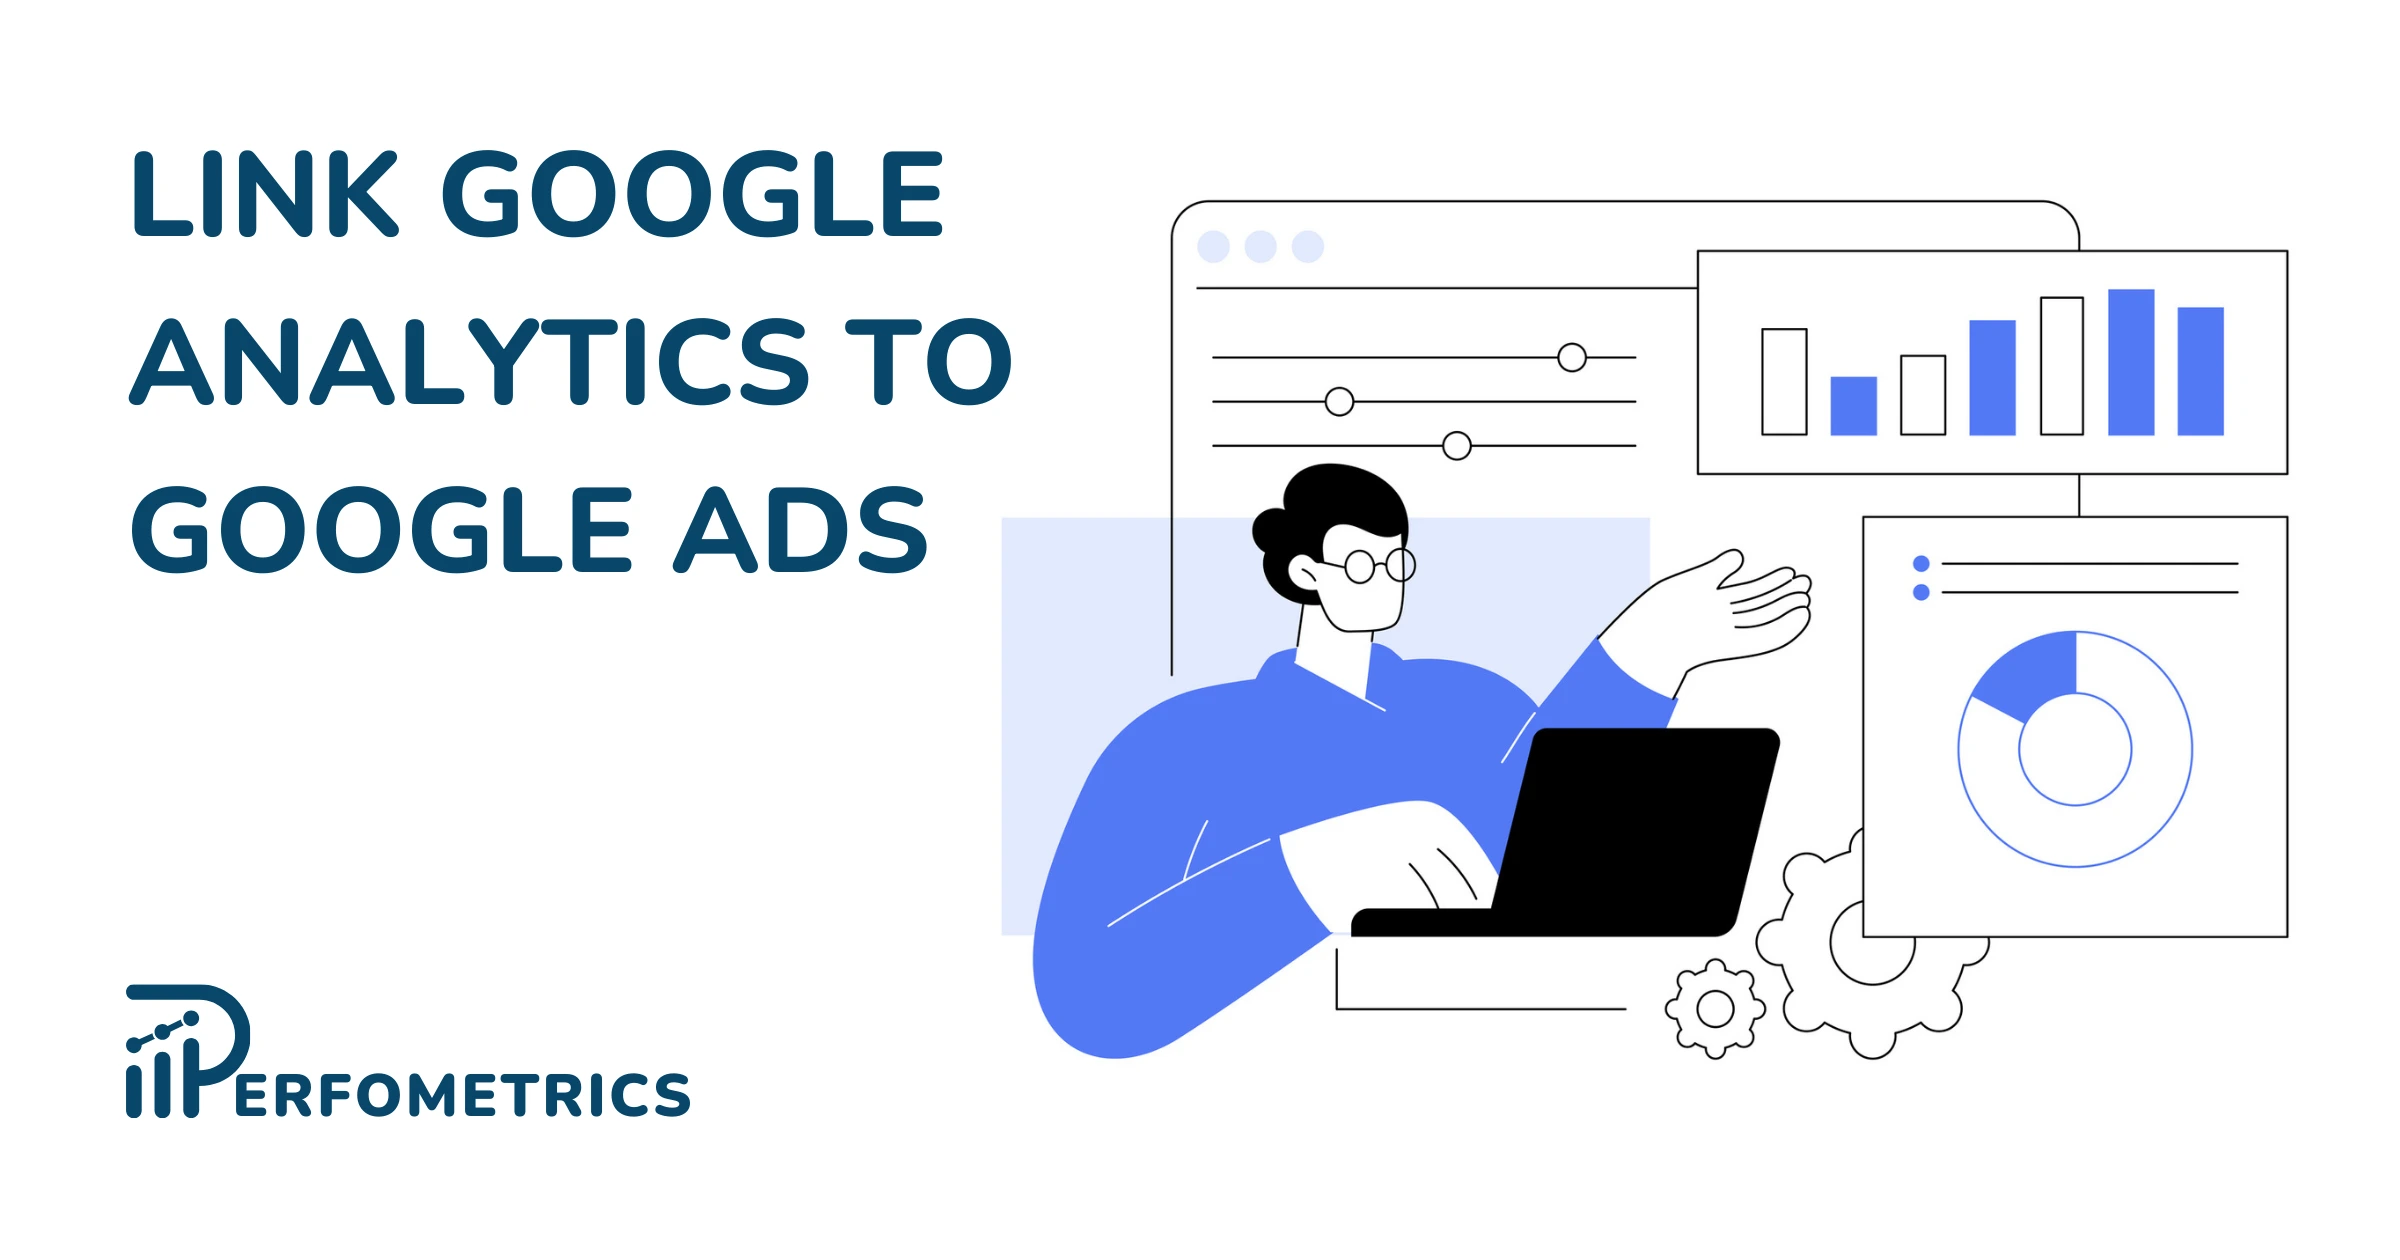 How To Link Google Analytics To Google Ads